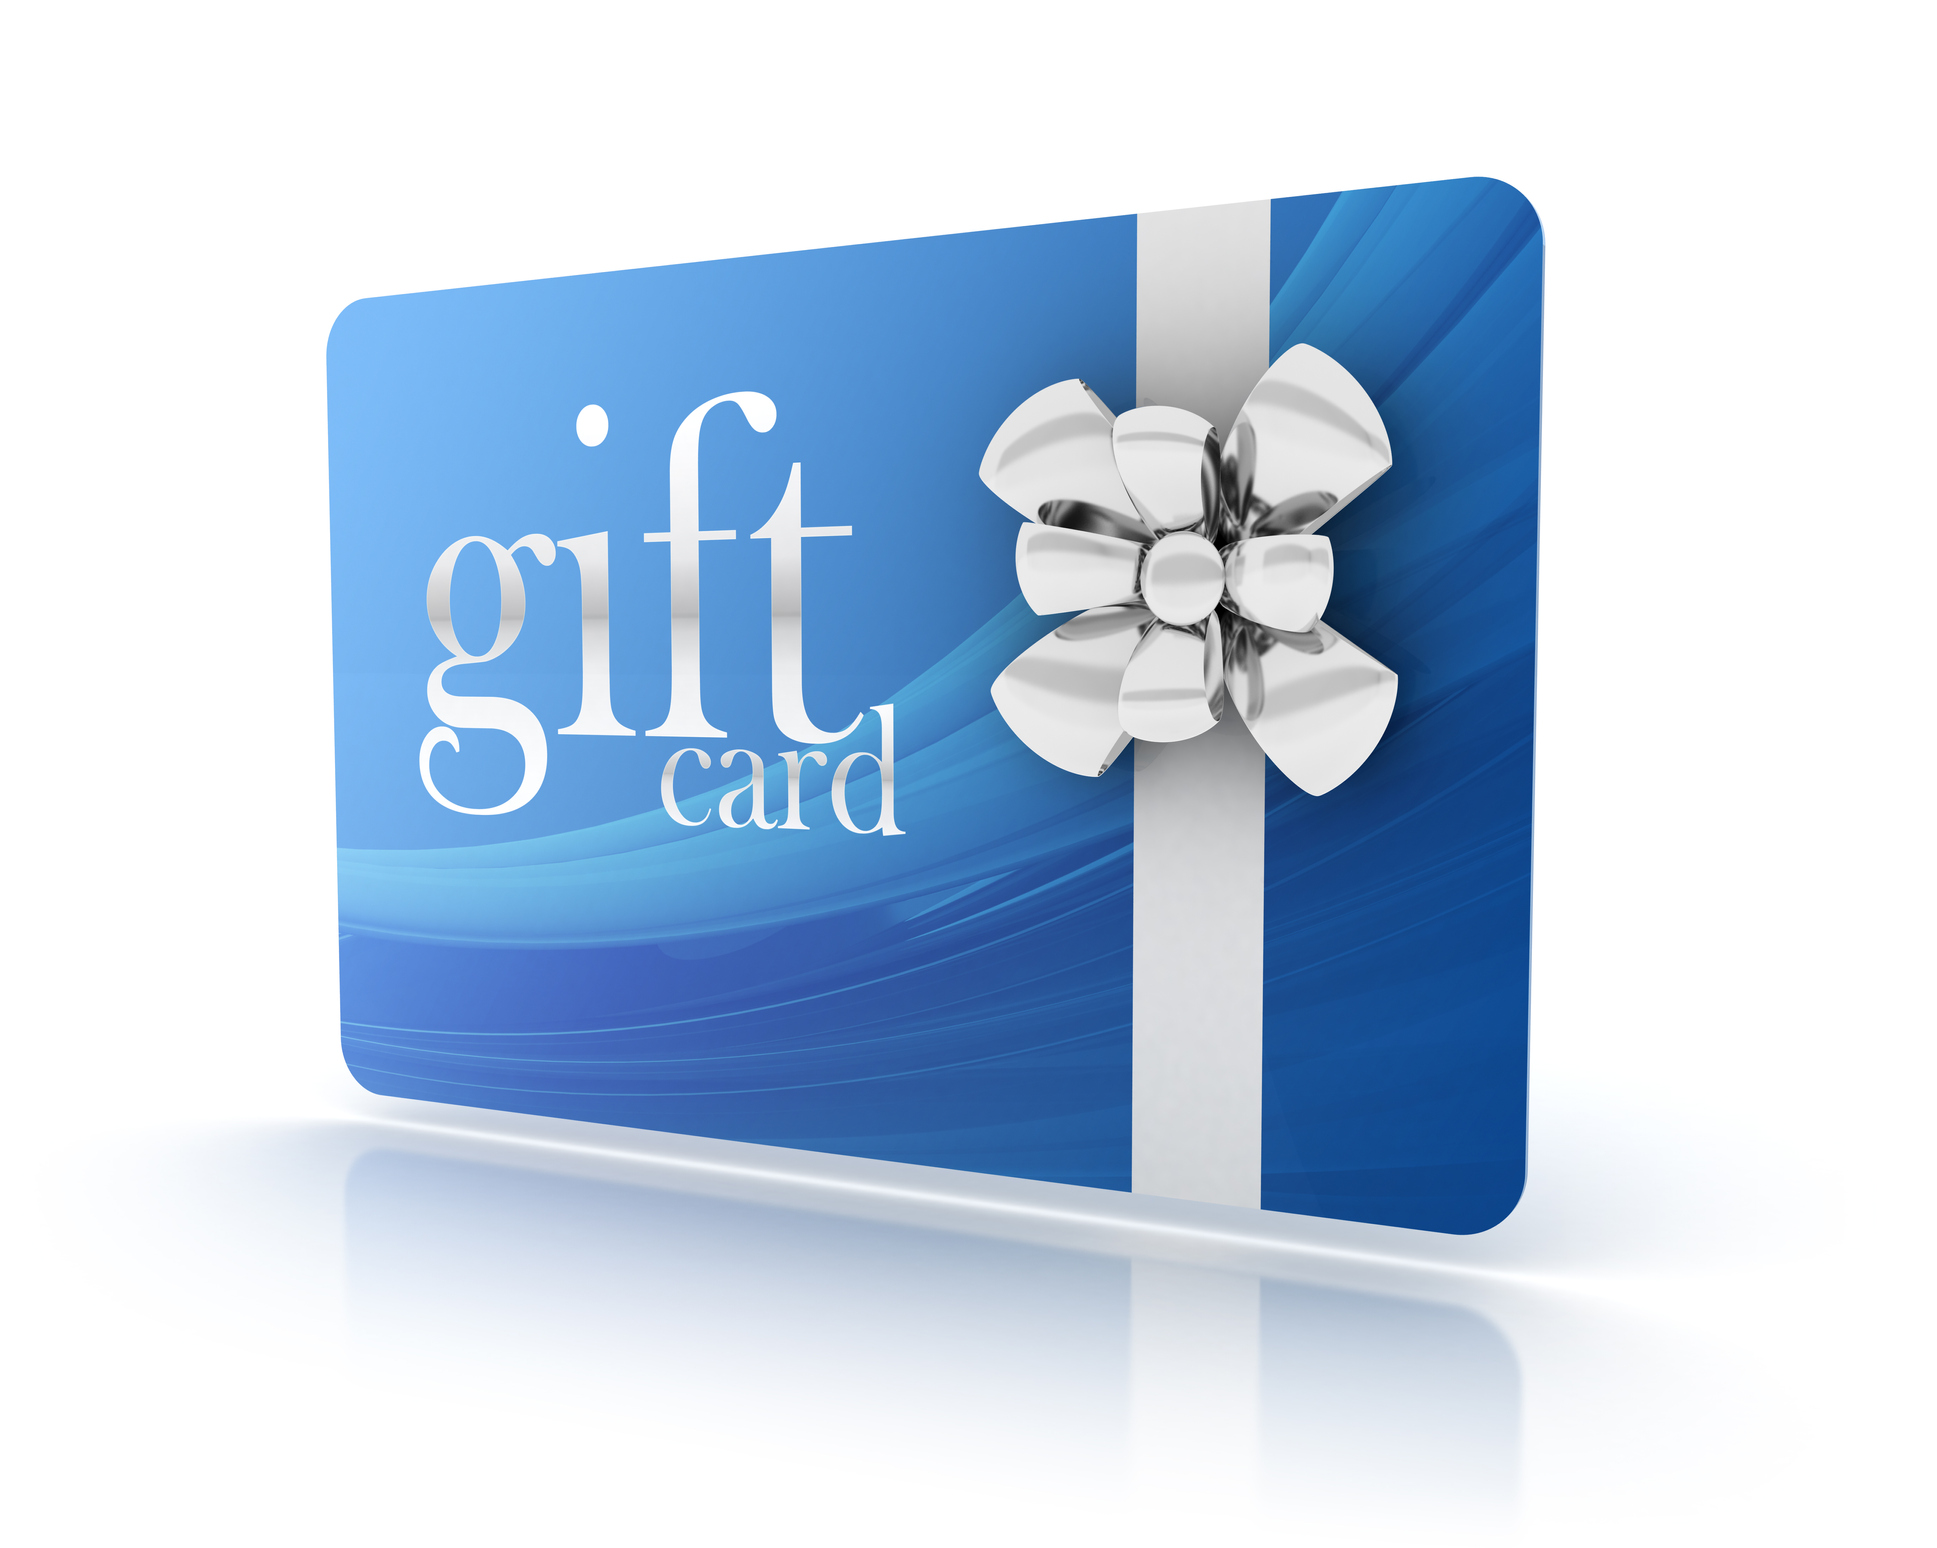 Gift Card Scams